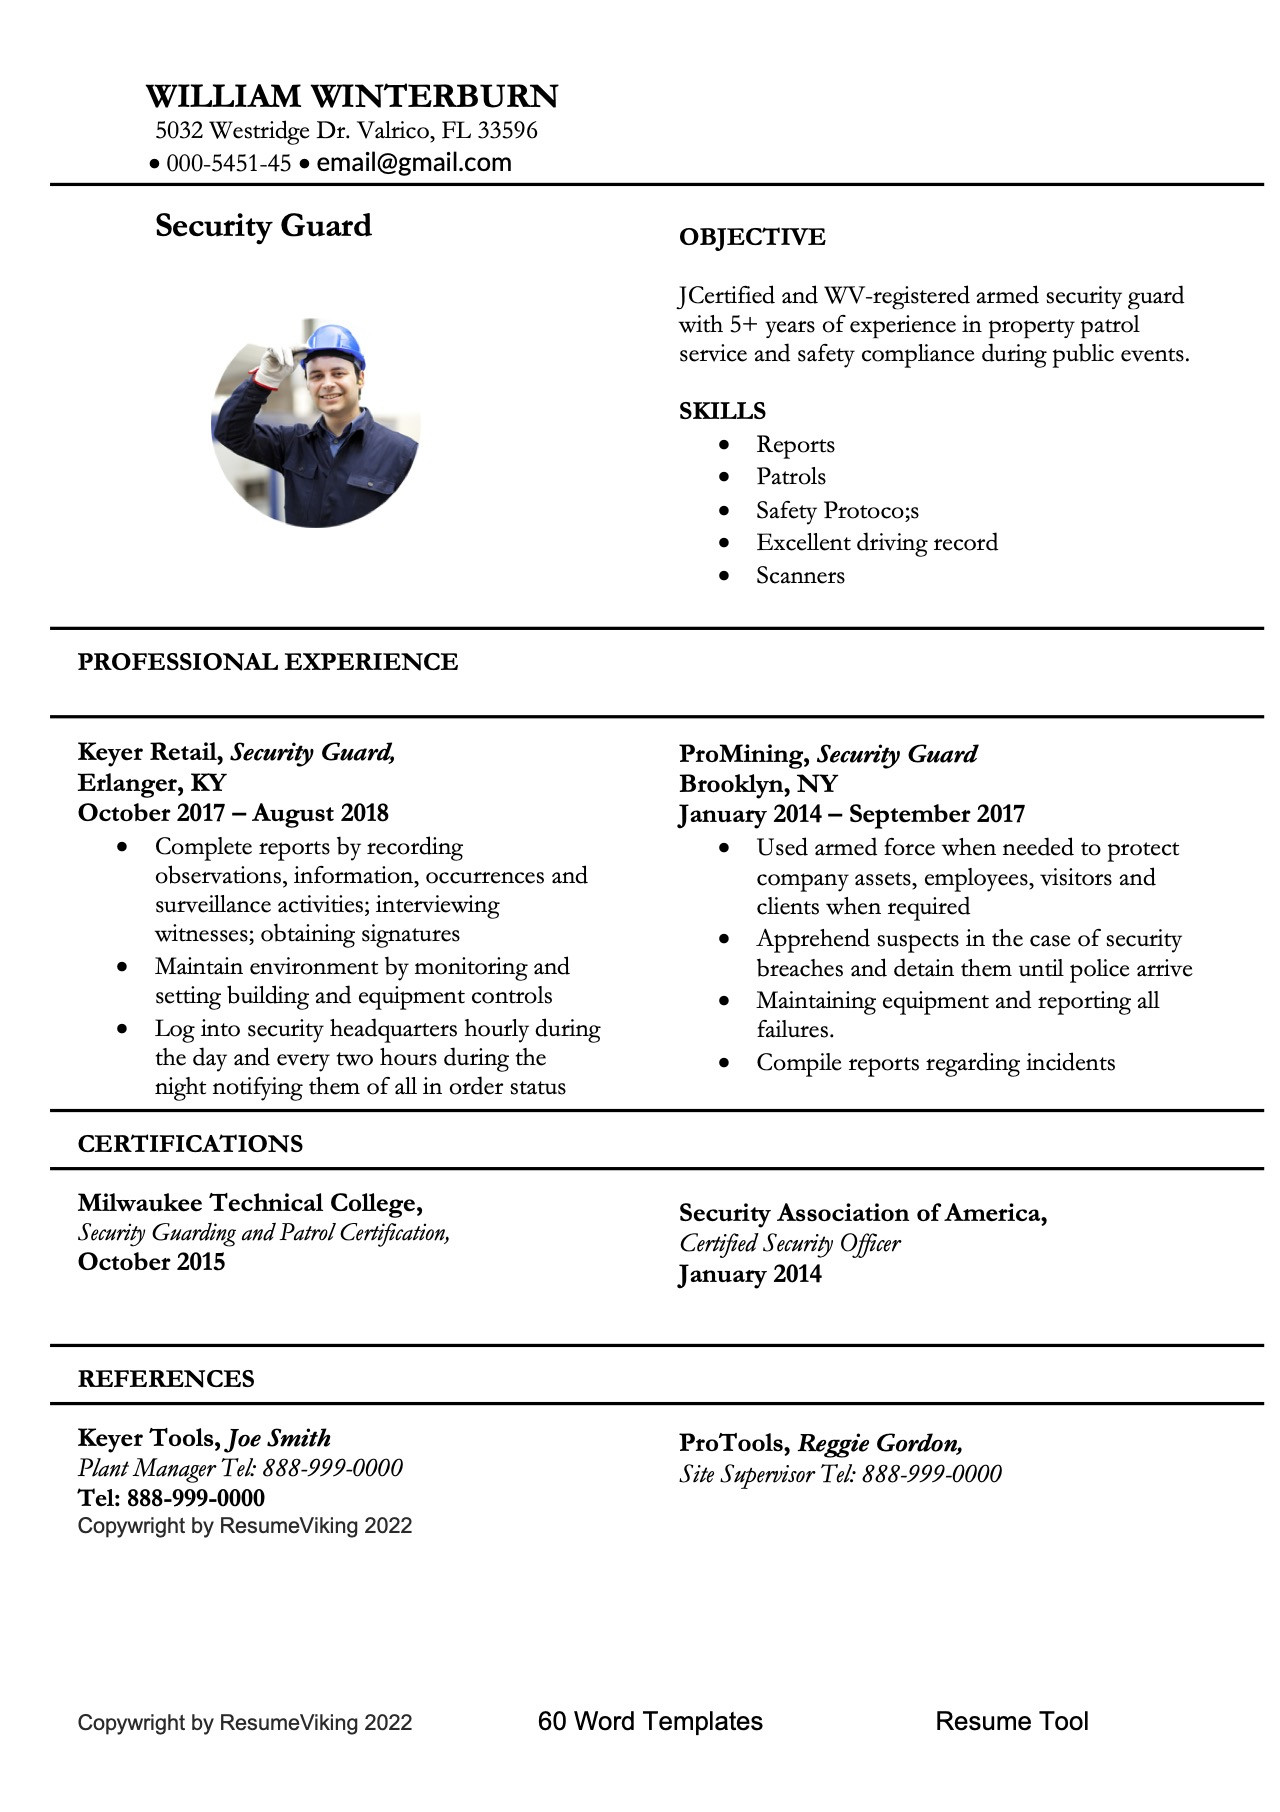 Sample Resume for School Security Guard Security Guard Resume & Writing Guide  20 Templates Pdf & Word